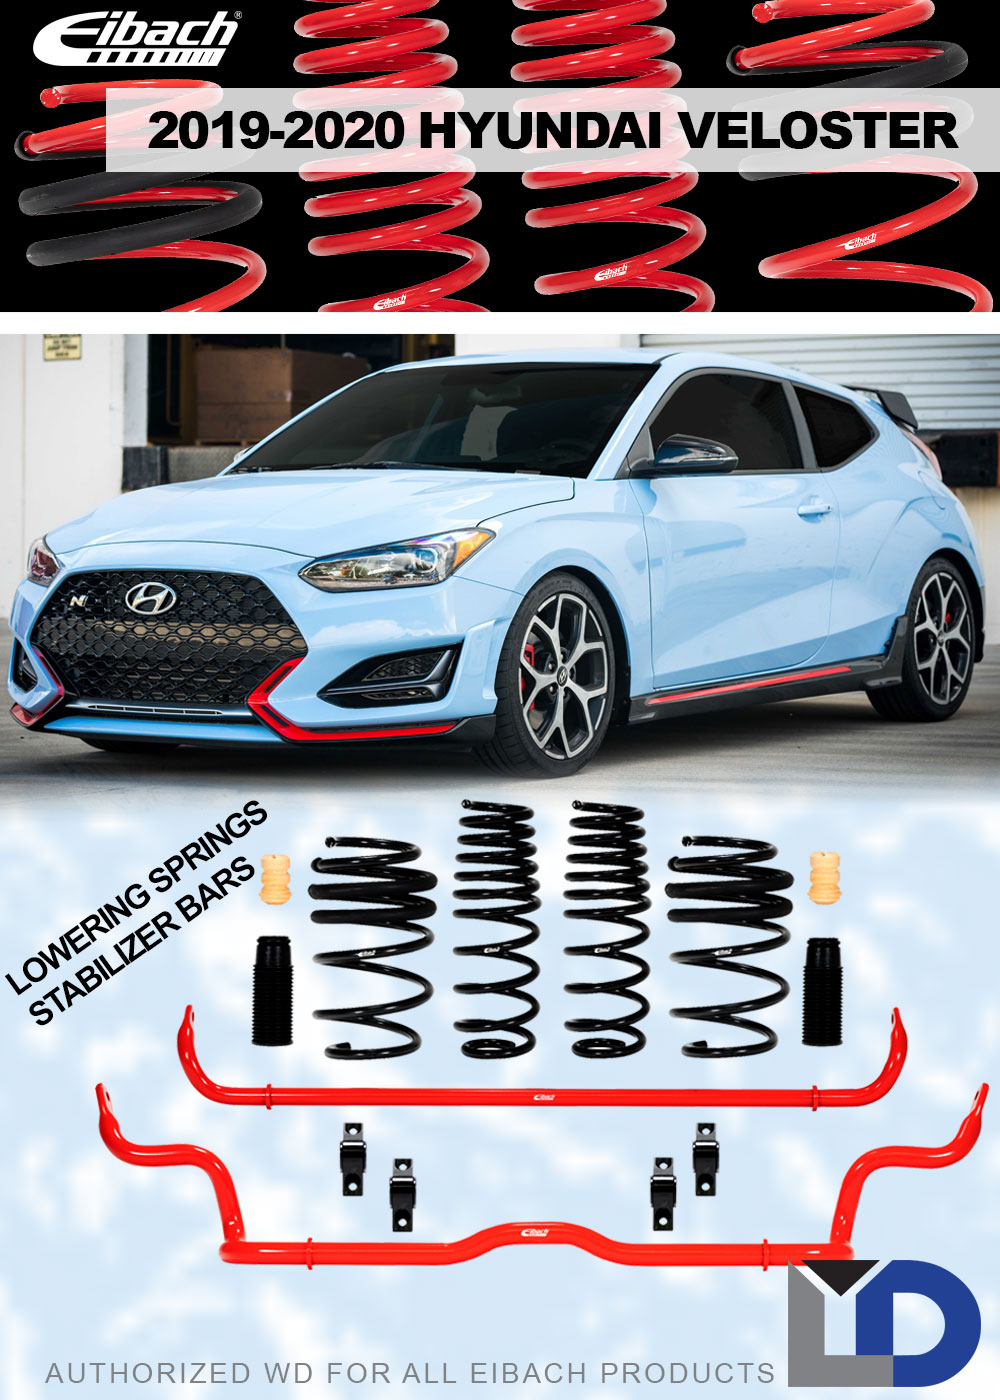 EIBACH Lowering Kit and Sway Bar Upgrades for the 2019+ Hyundai Veloster